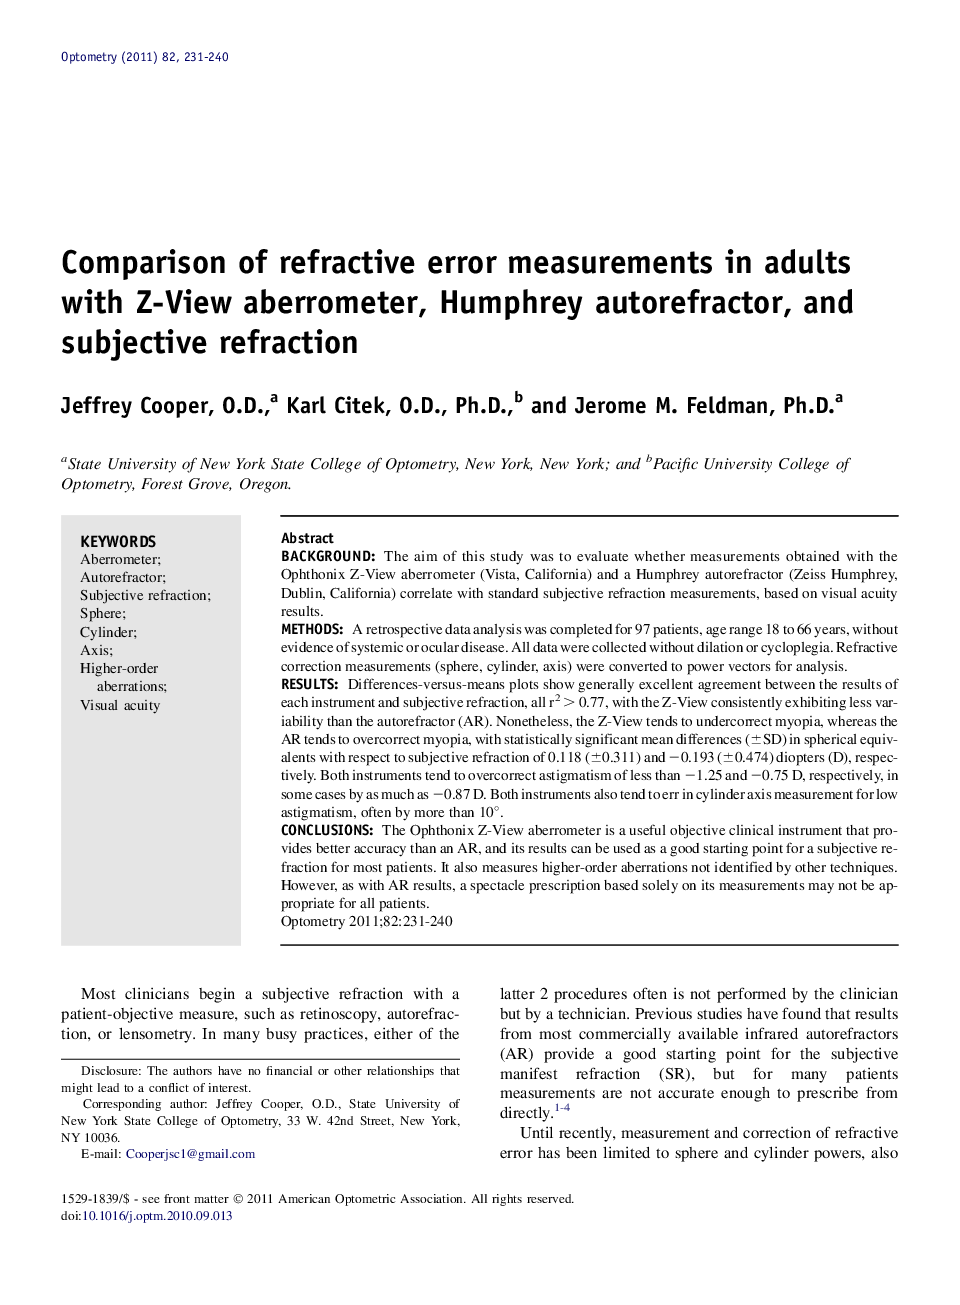 Comparison of refractive error measurements in adults with Z-View aberrometer, Humphrey autorefractor, and subjective refraction 